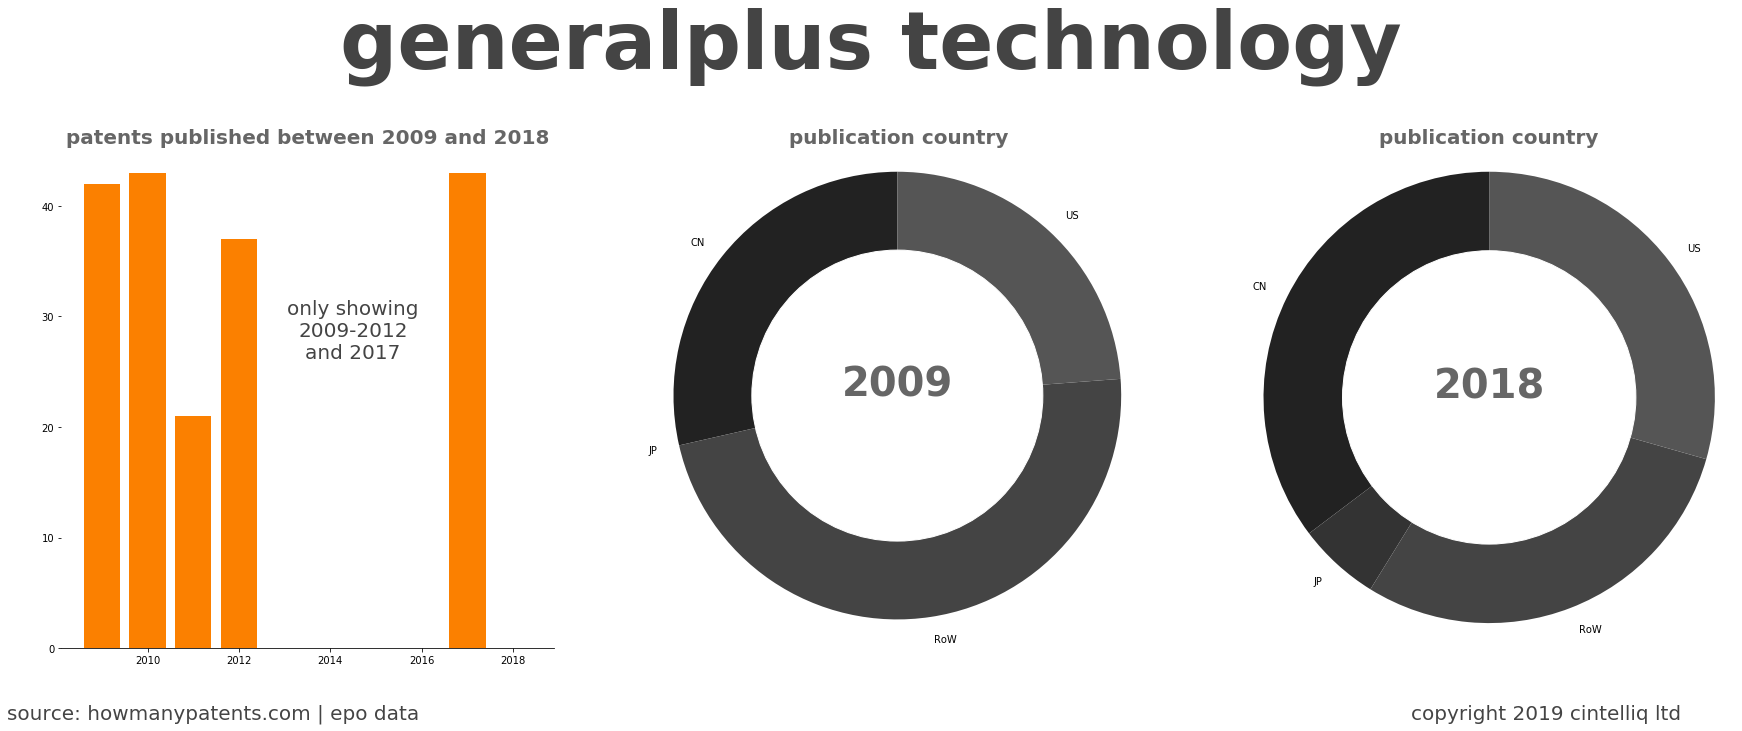 summary of patents for Generalplus Technology